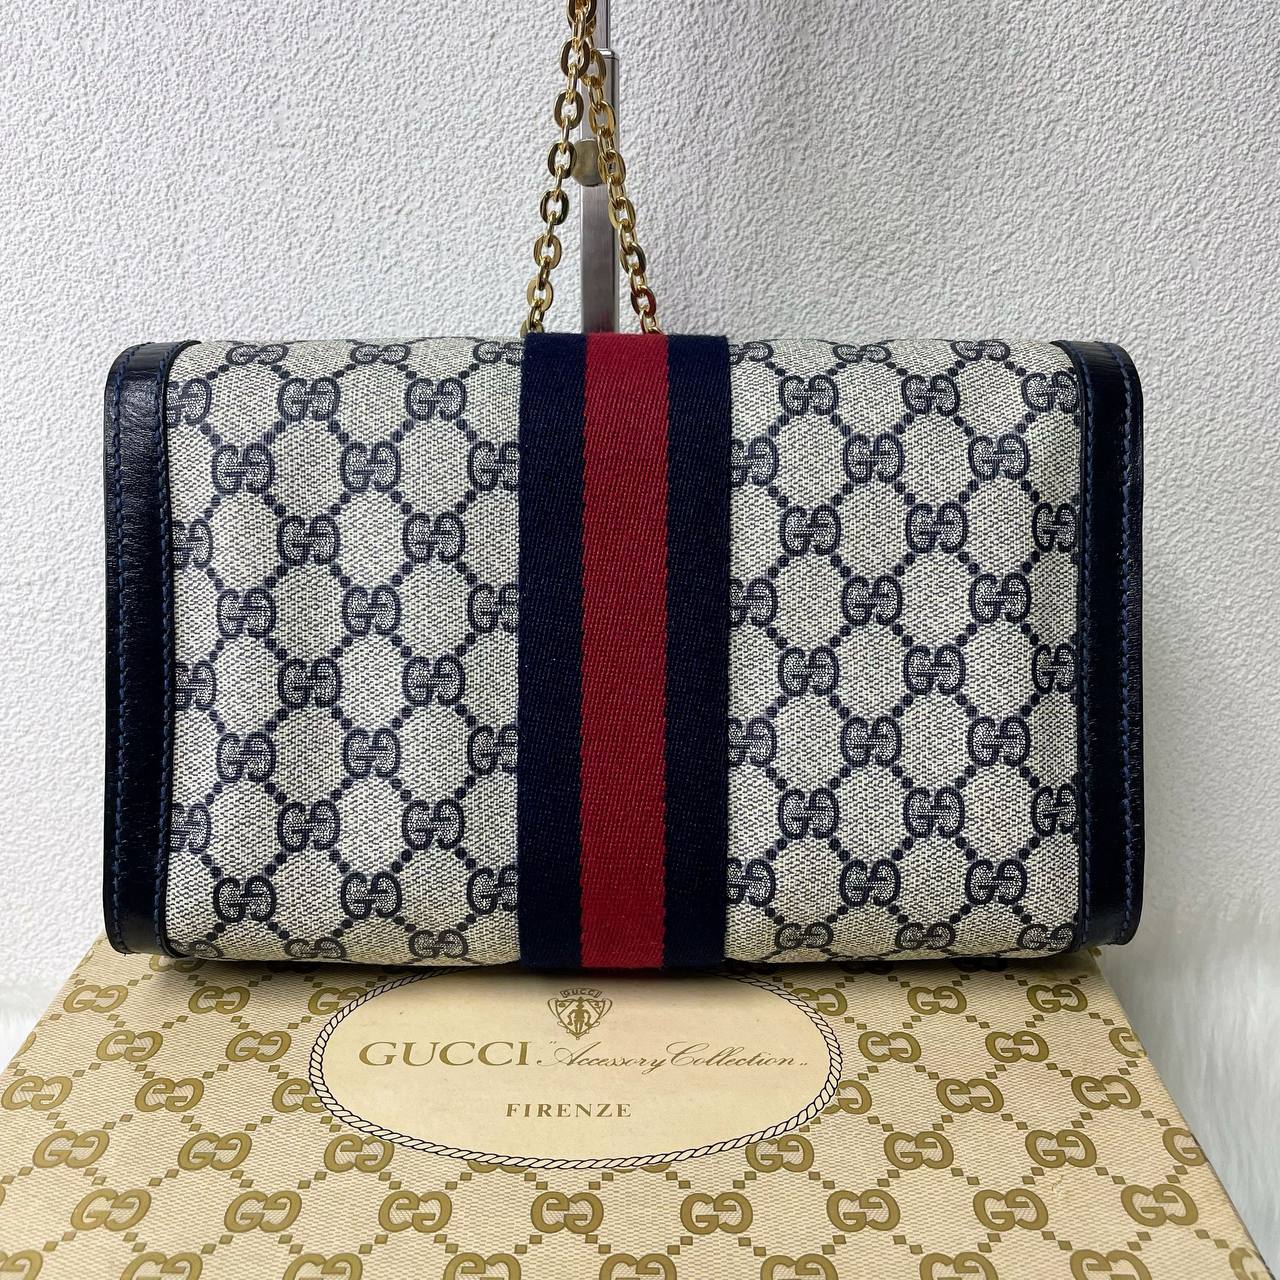 【 In-Stock 】Old Gucci 中古 Sherry Line 手拿包 / 斜揹包